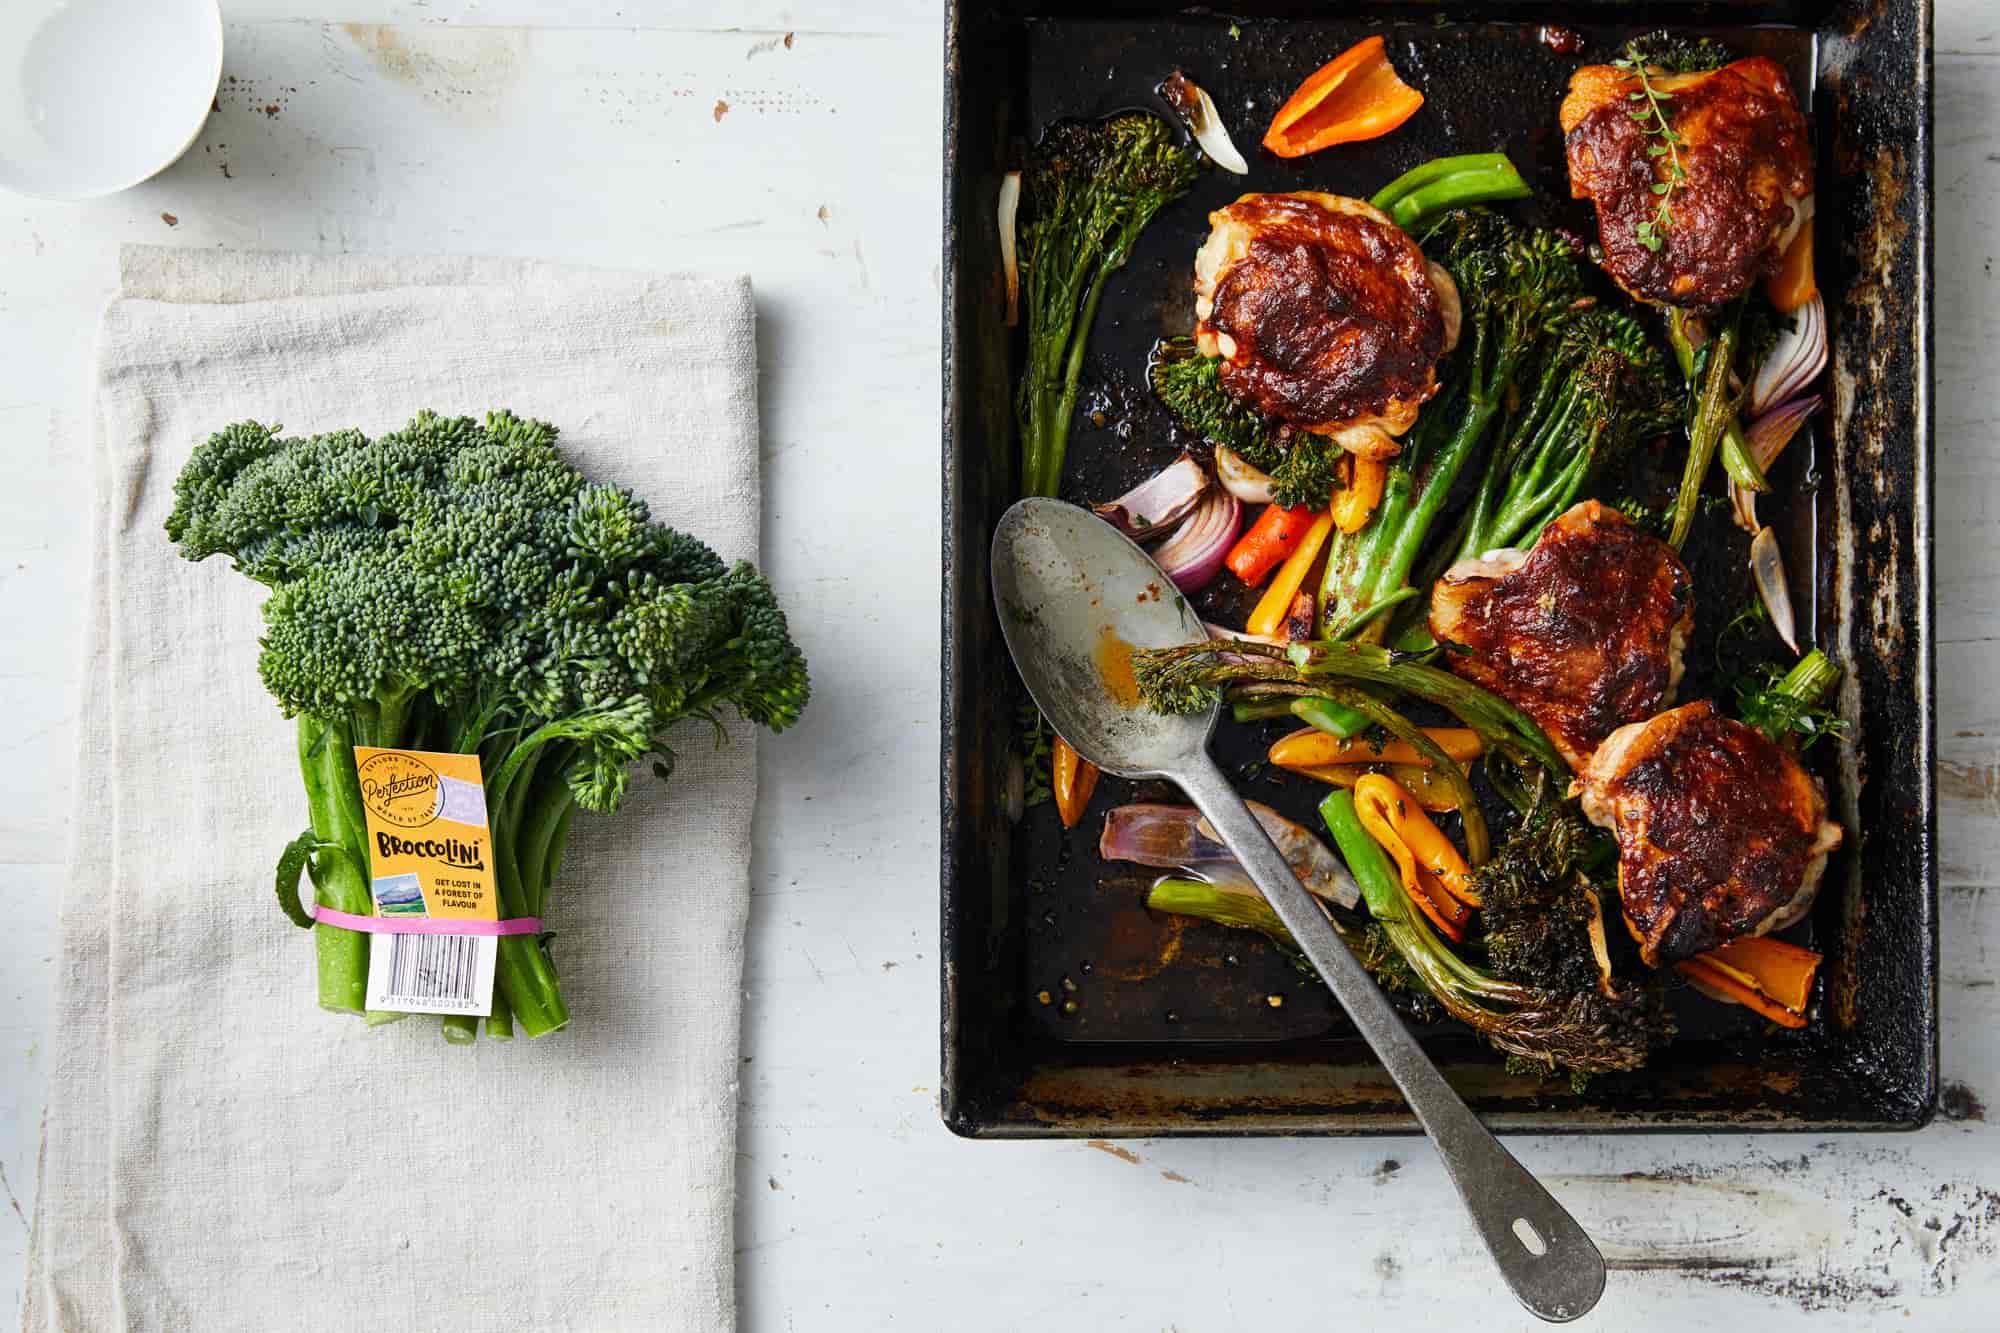 Roasted chicken thigh cutlets with roasted broccolini and other vegetables in a roasting pan.